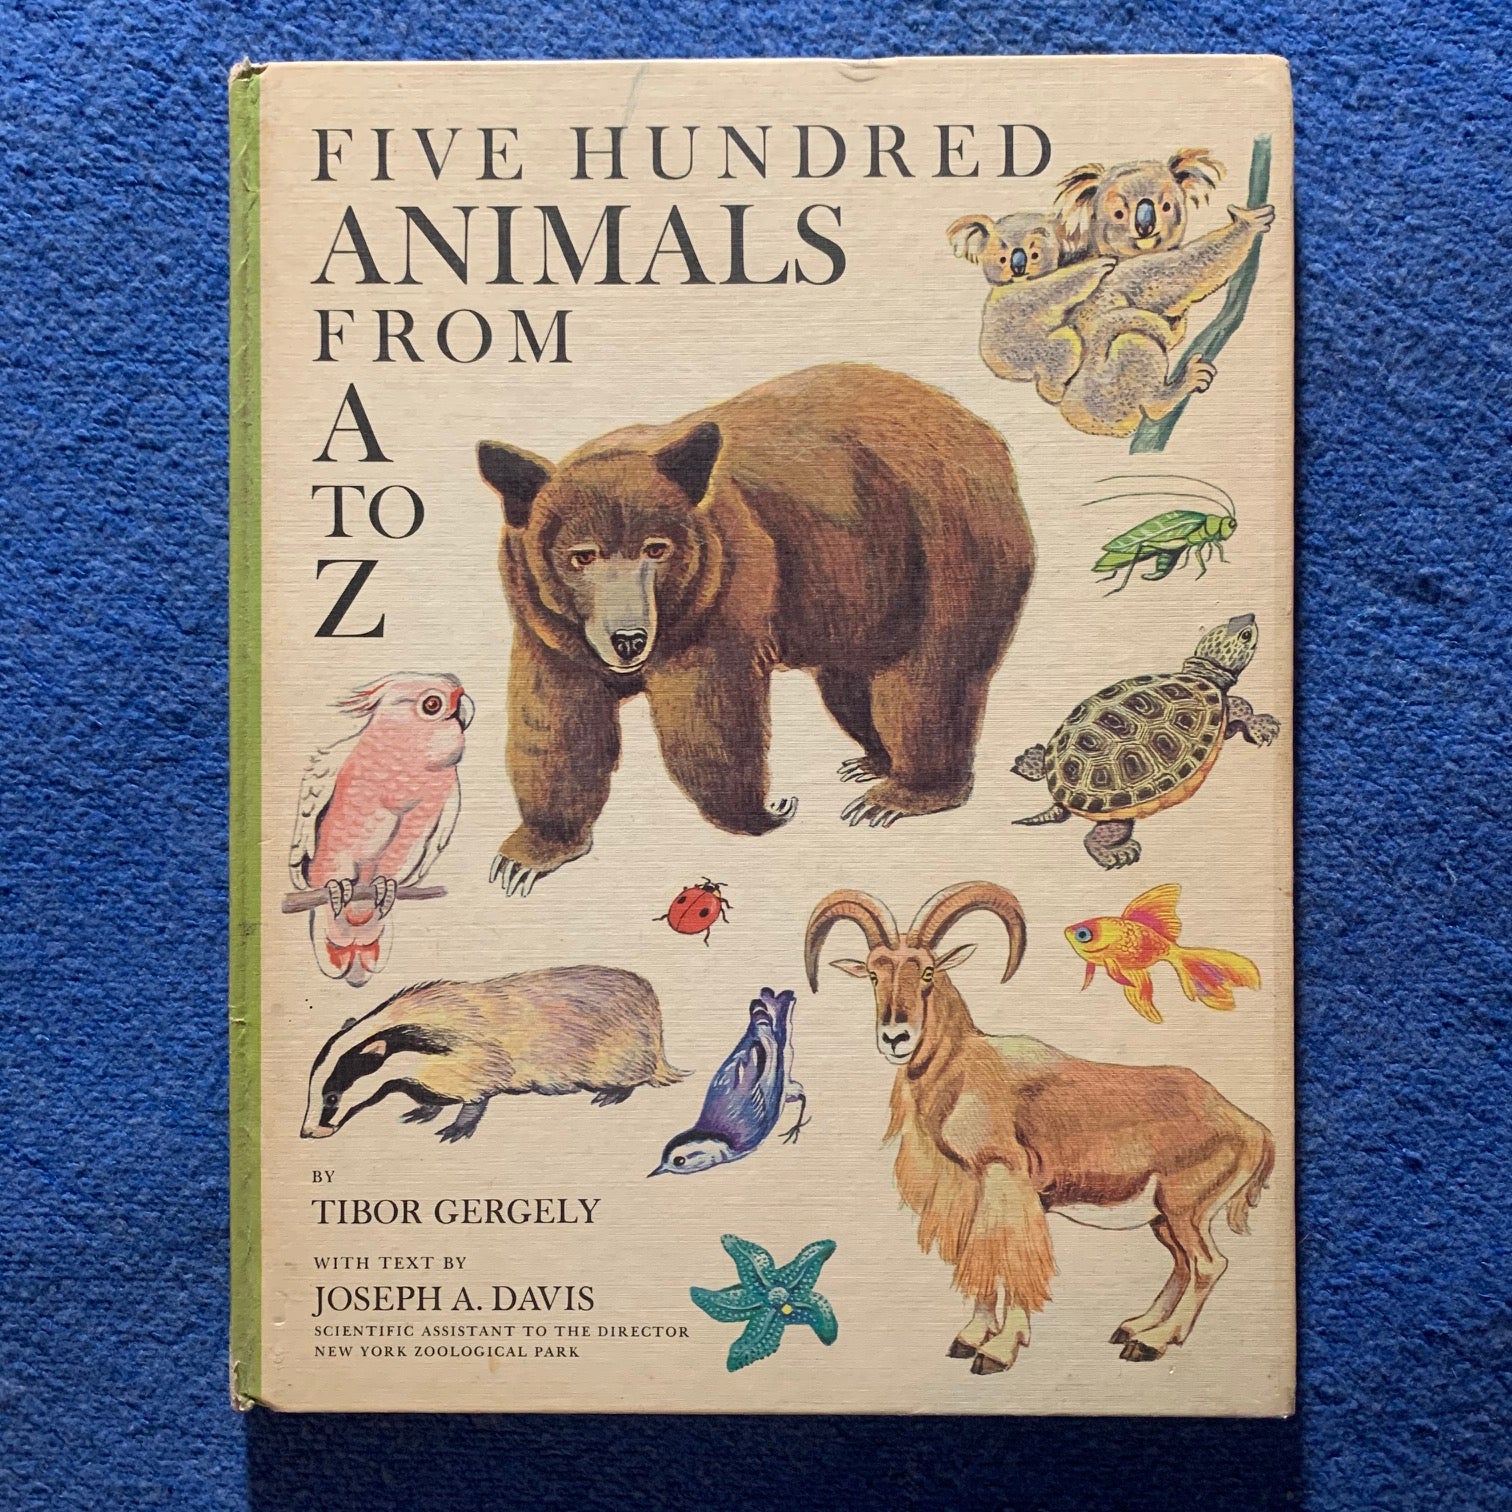 Five Hundred Animals from A to Z by Tibor Gergely